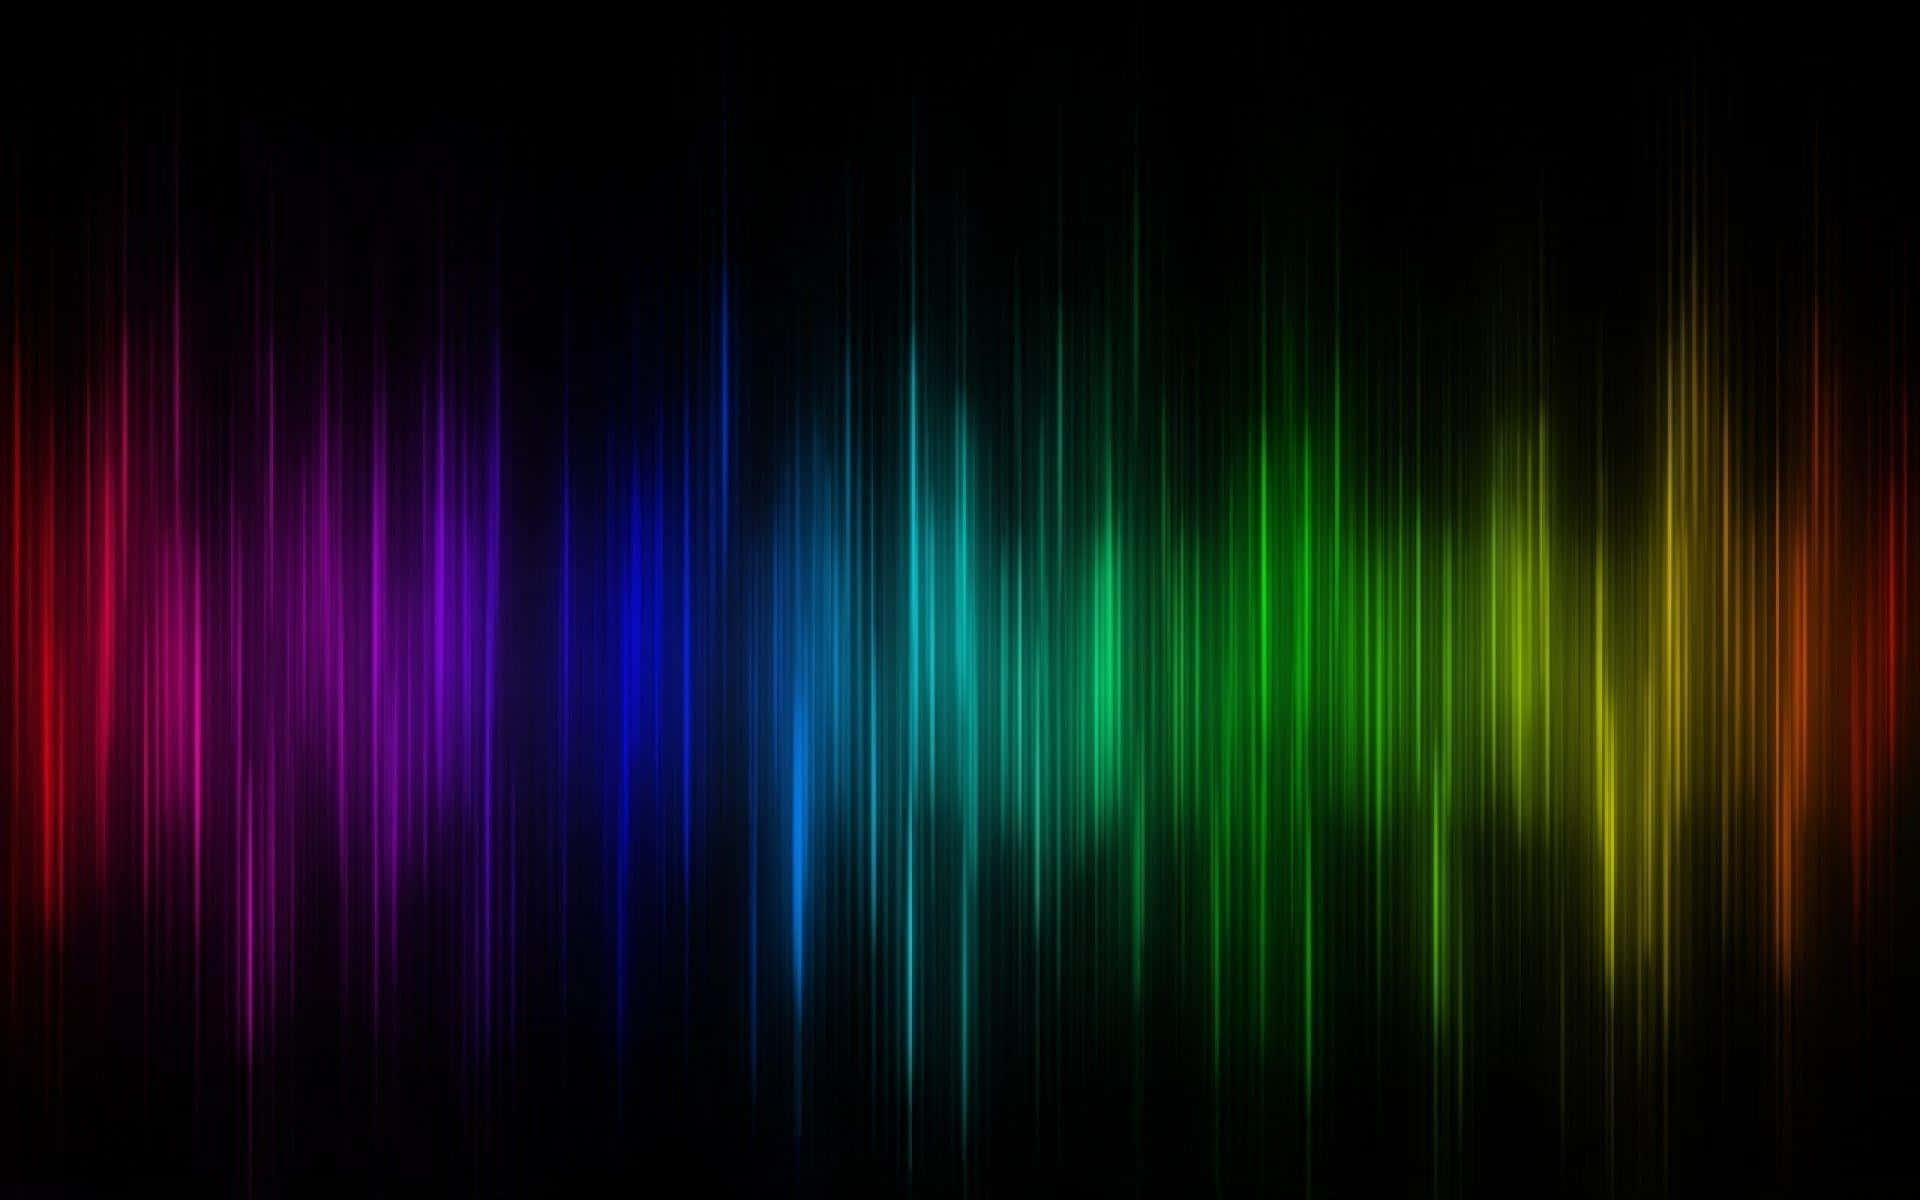 Enjoy the colorful beauty of the visible spectrum.